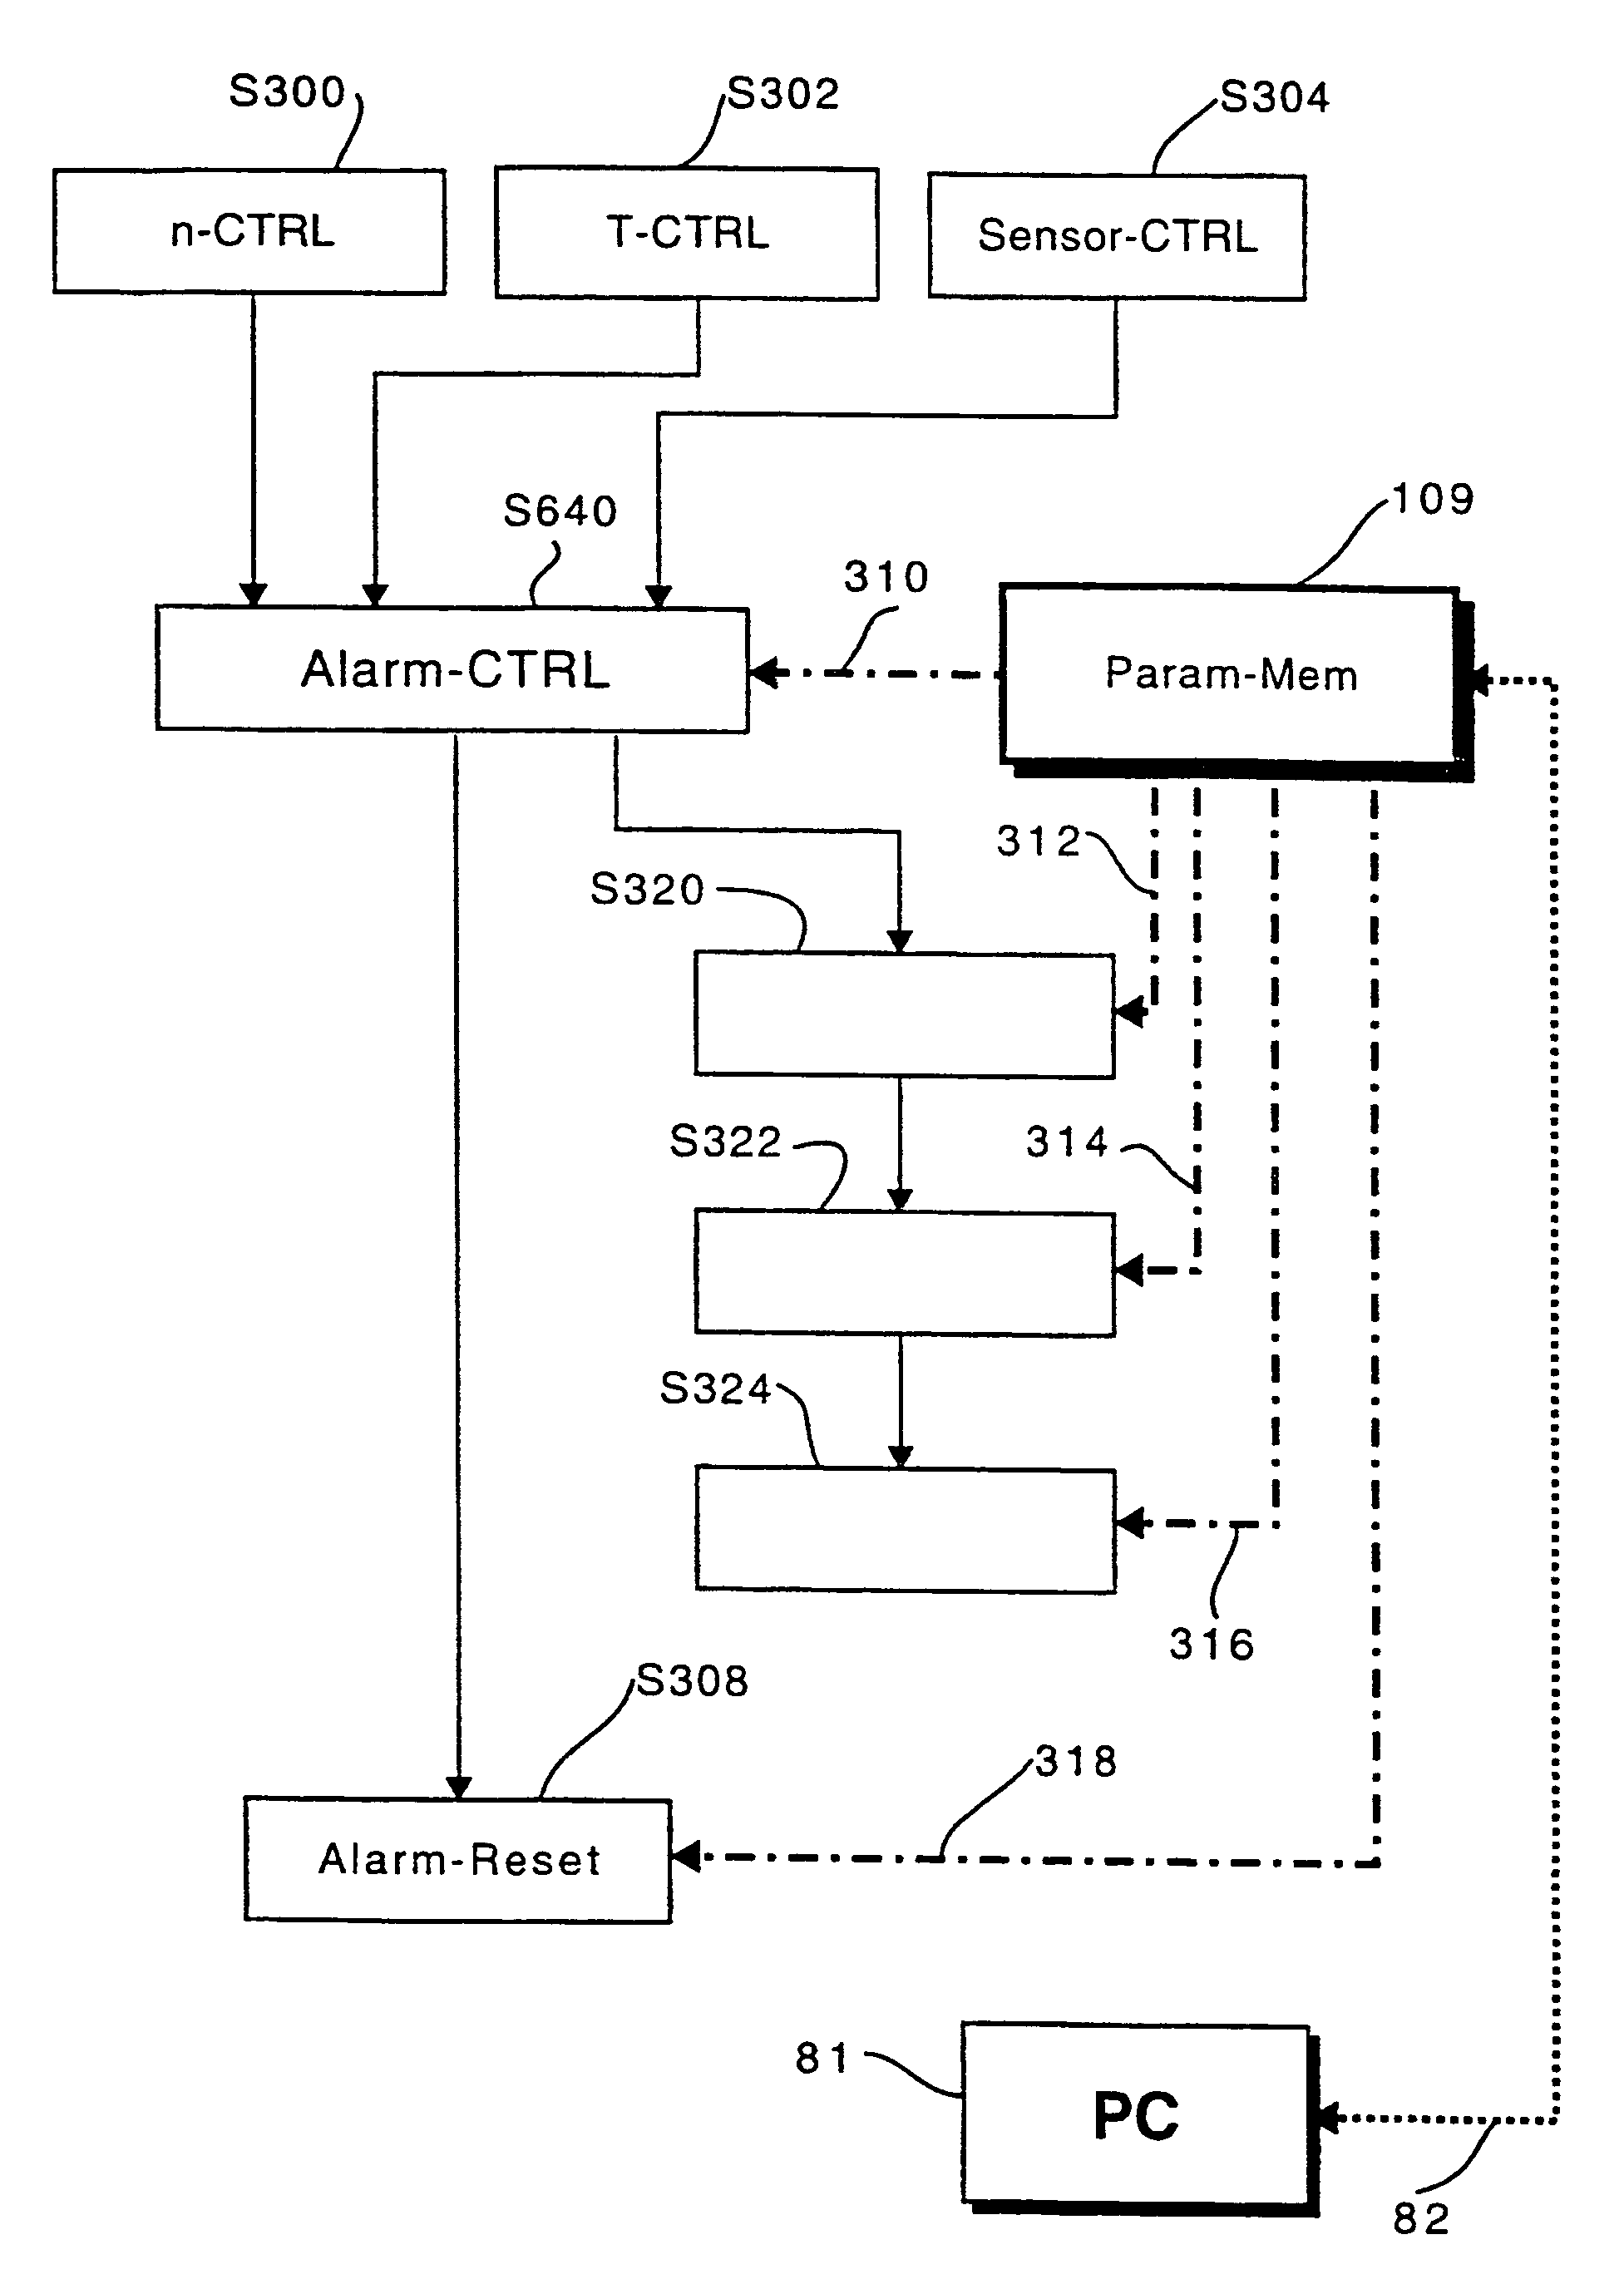 Method for configuring the alarm device of an electrical motor and motor for implementing said method